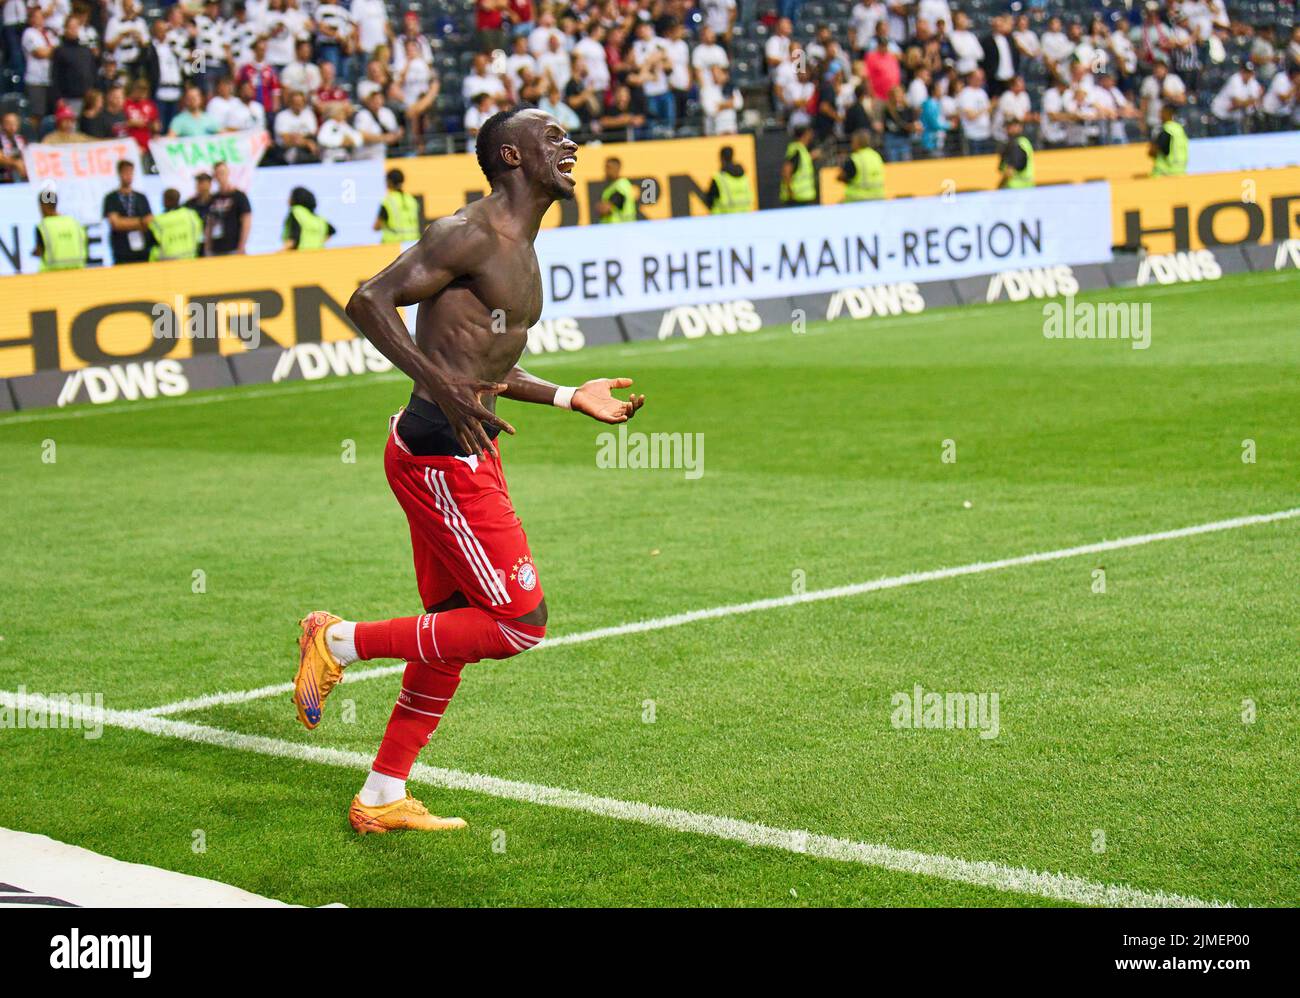 Sadio Mane (FCB 17) celebrate with fans in the match EINTRACHT FRANKFURT - FC BAYERN MÜNCHEN  1-6 1.German Football League on Aug 05, 2022 in Frankfurt, Germany. Season 2022/2023, matchday 1, 1.Bundesliga, FCB, Munich, 1.Spieltag © Peter Schatz / Alamy Live News    - DFL REGULATIONS PROHIBIT ANY USE OF PHOTOGRAPHS as IMAGE SEQUENCES and/or QUASI-VIDEO - Stock Photo